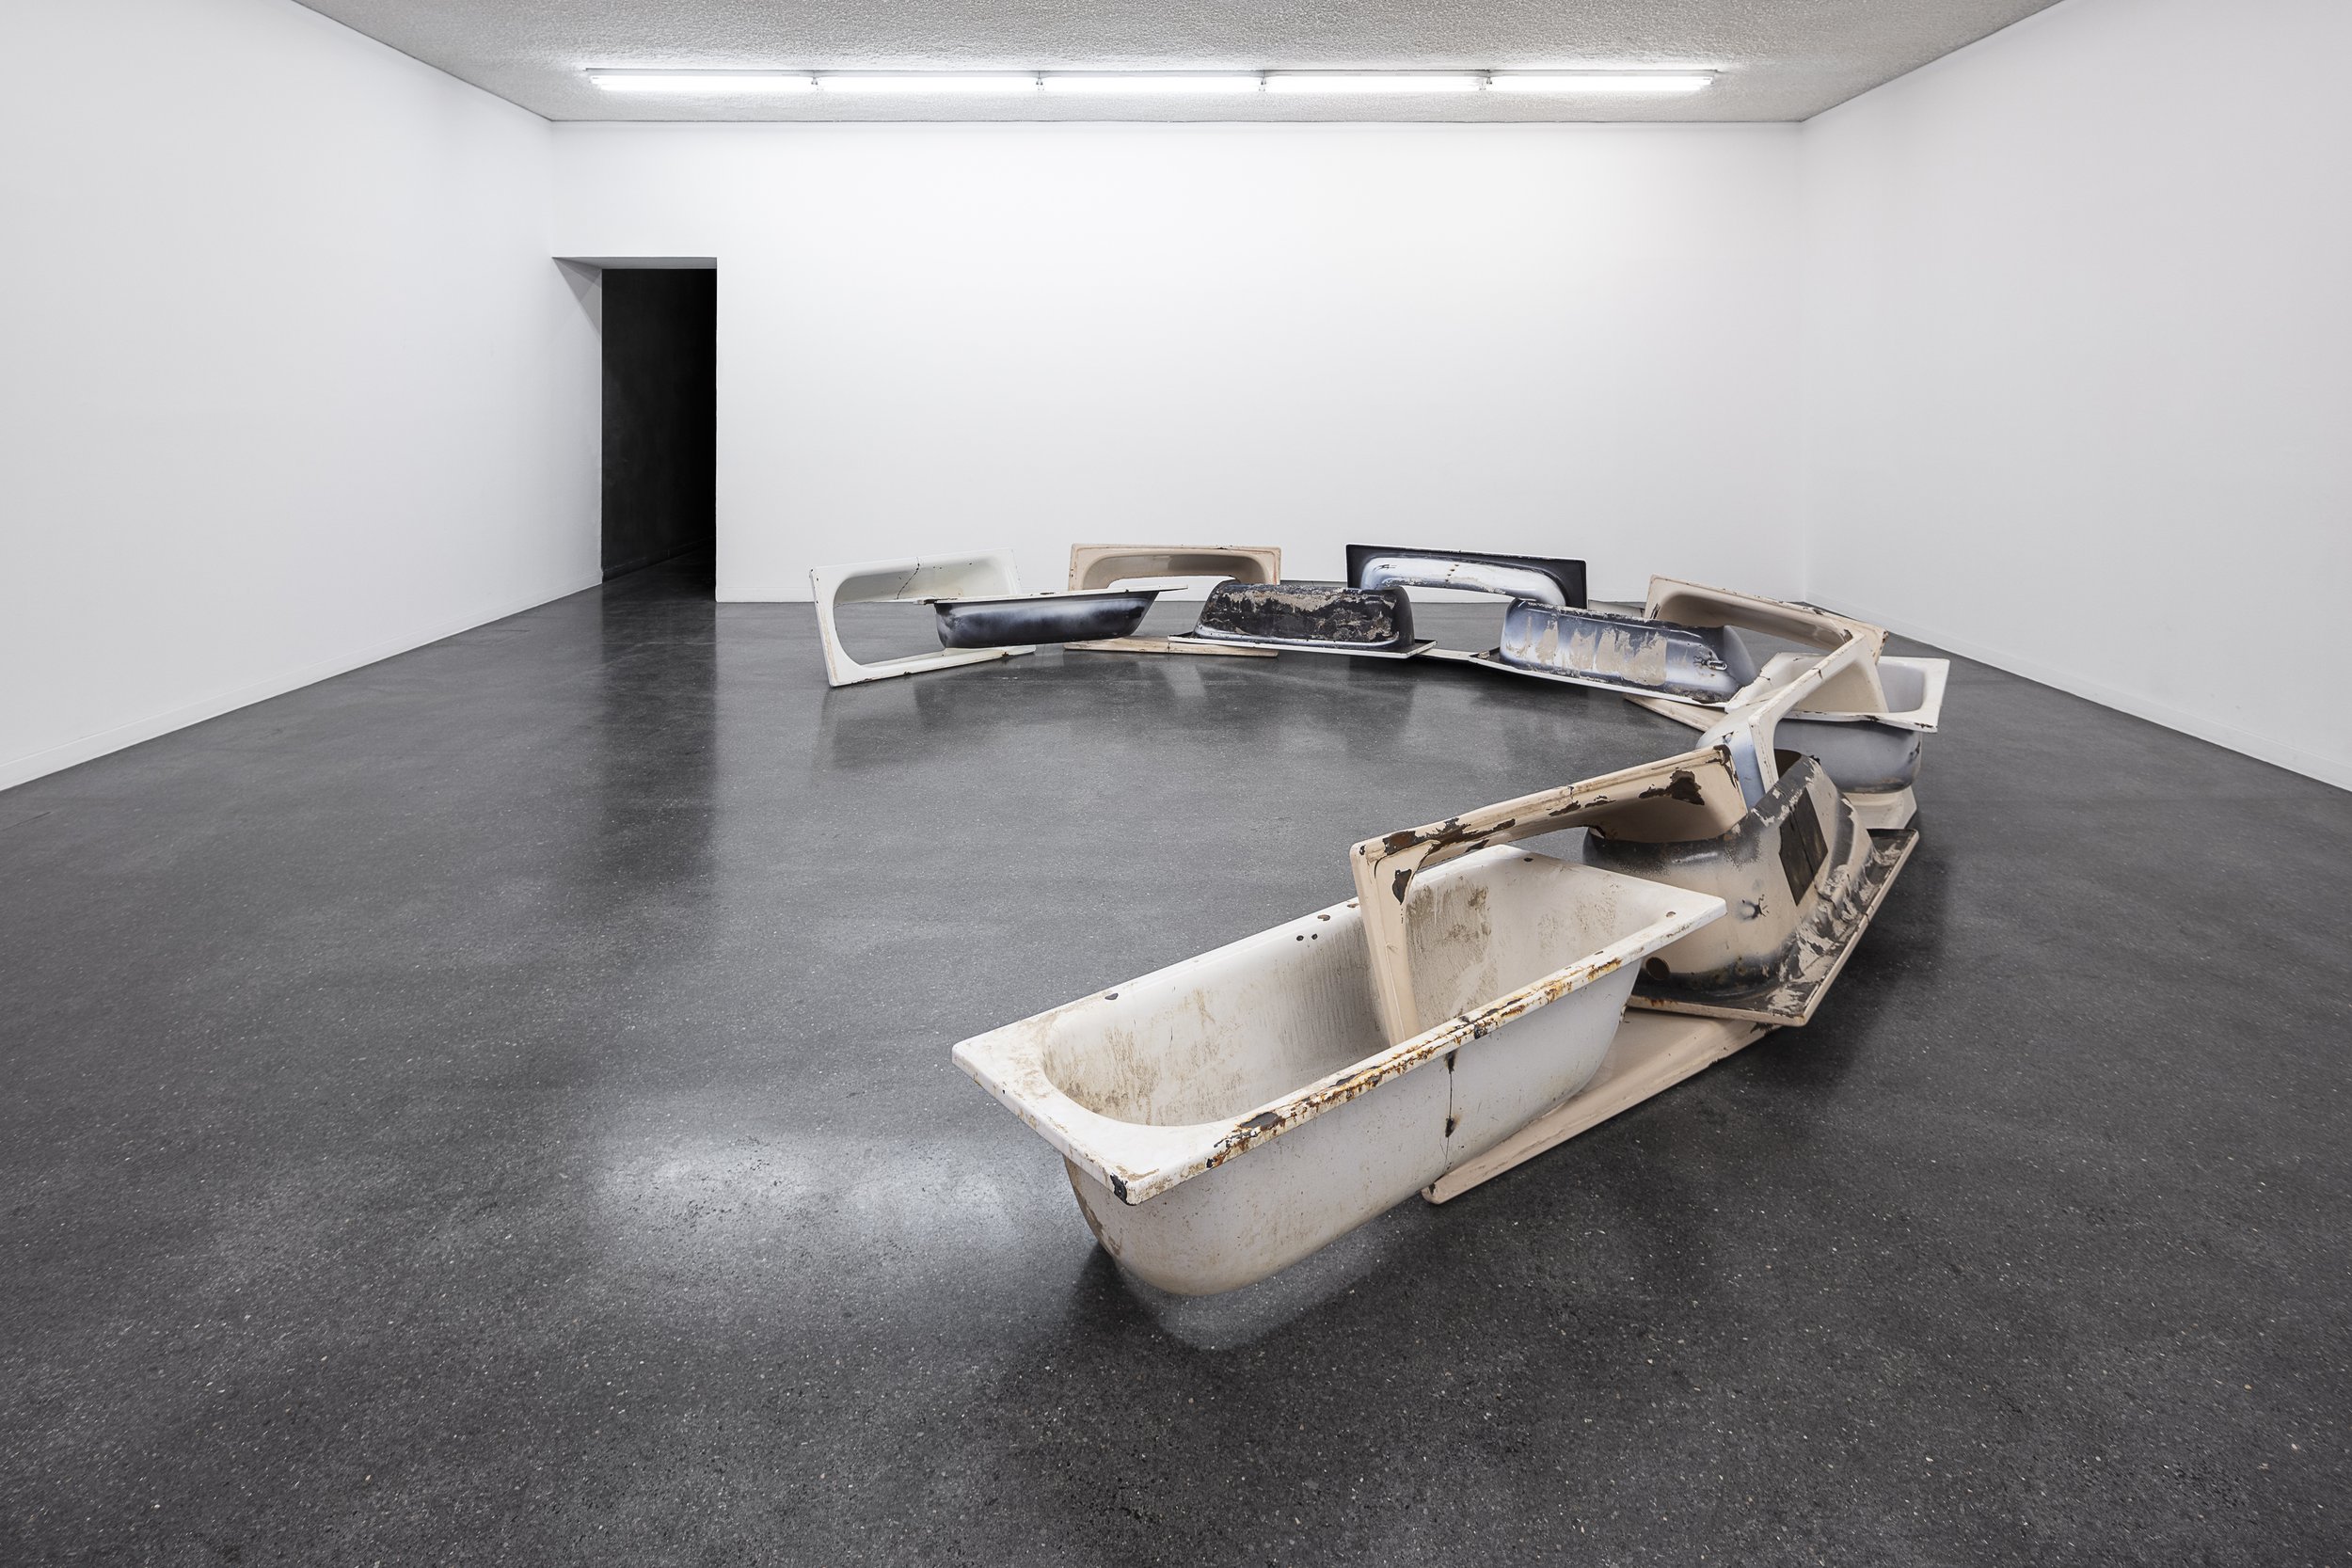  Bat-Ami Rivlin  Untitled (12 tubs) , 2022  twelve tubs dimensions variable to installation Photos via Tenerife Espacio de las Artes, Tenerife, Spain  from the exhibition  COLAPSO  on view 02 July - 18 September 2022 BR48 